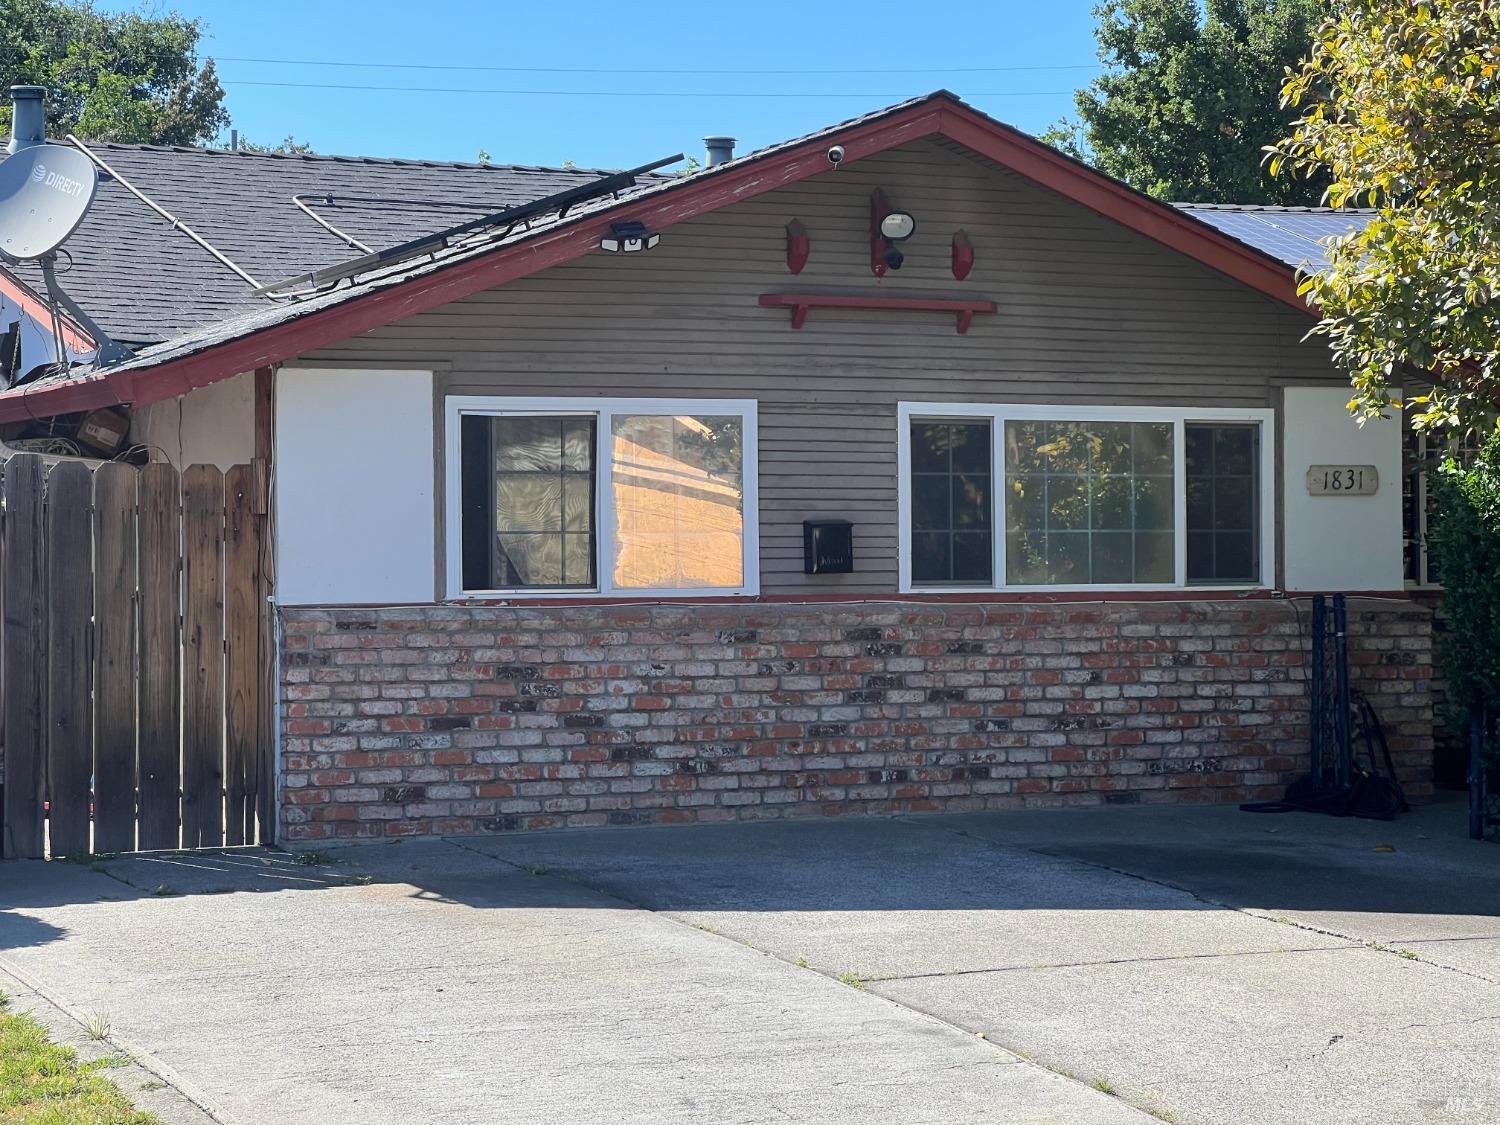 Photo of 1831 Clay St in Fairfield, CA